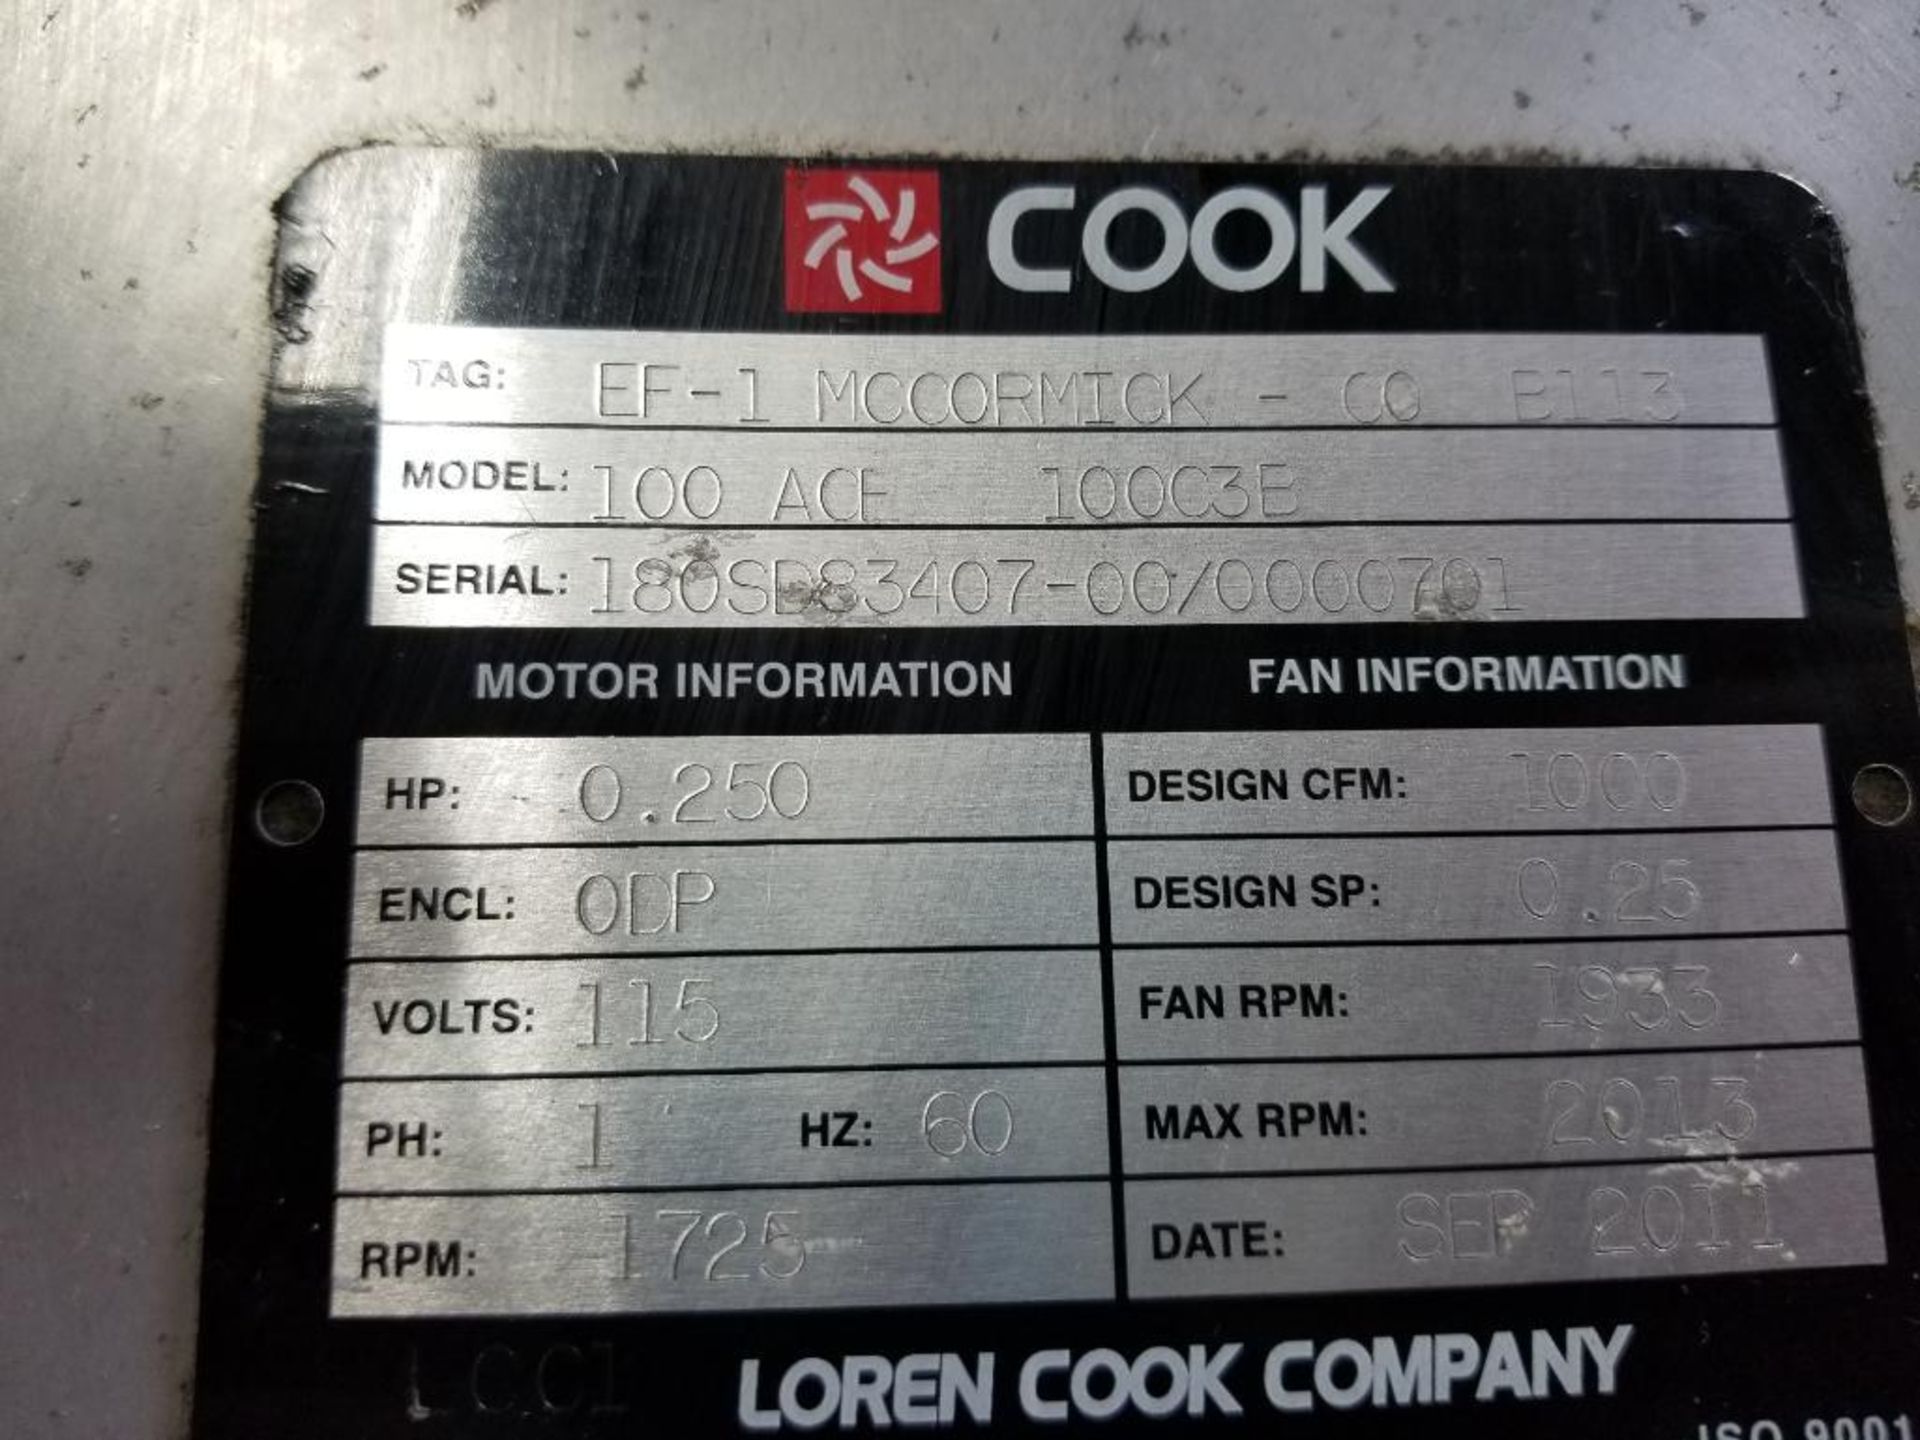 1/4hp Cook exhaust fan. Model 100ACE, 100C3E. 1000cfm. 115v single phase. - Image 4 of 5